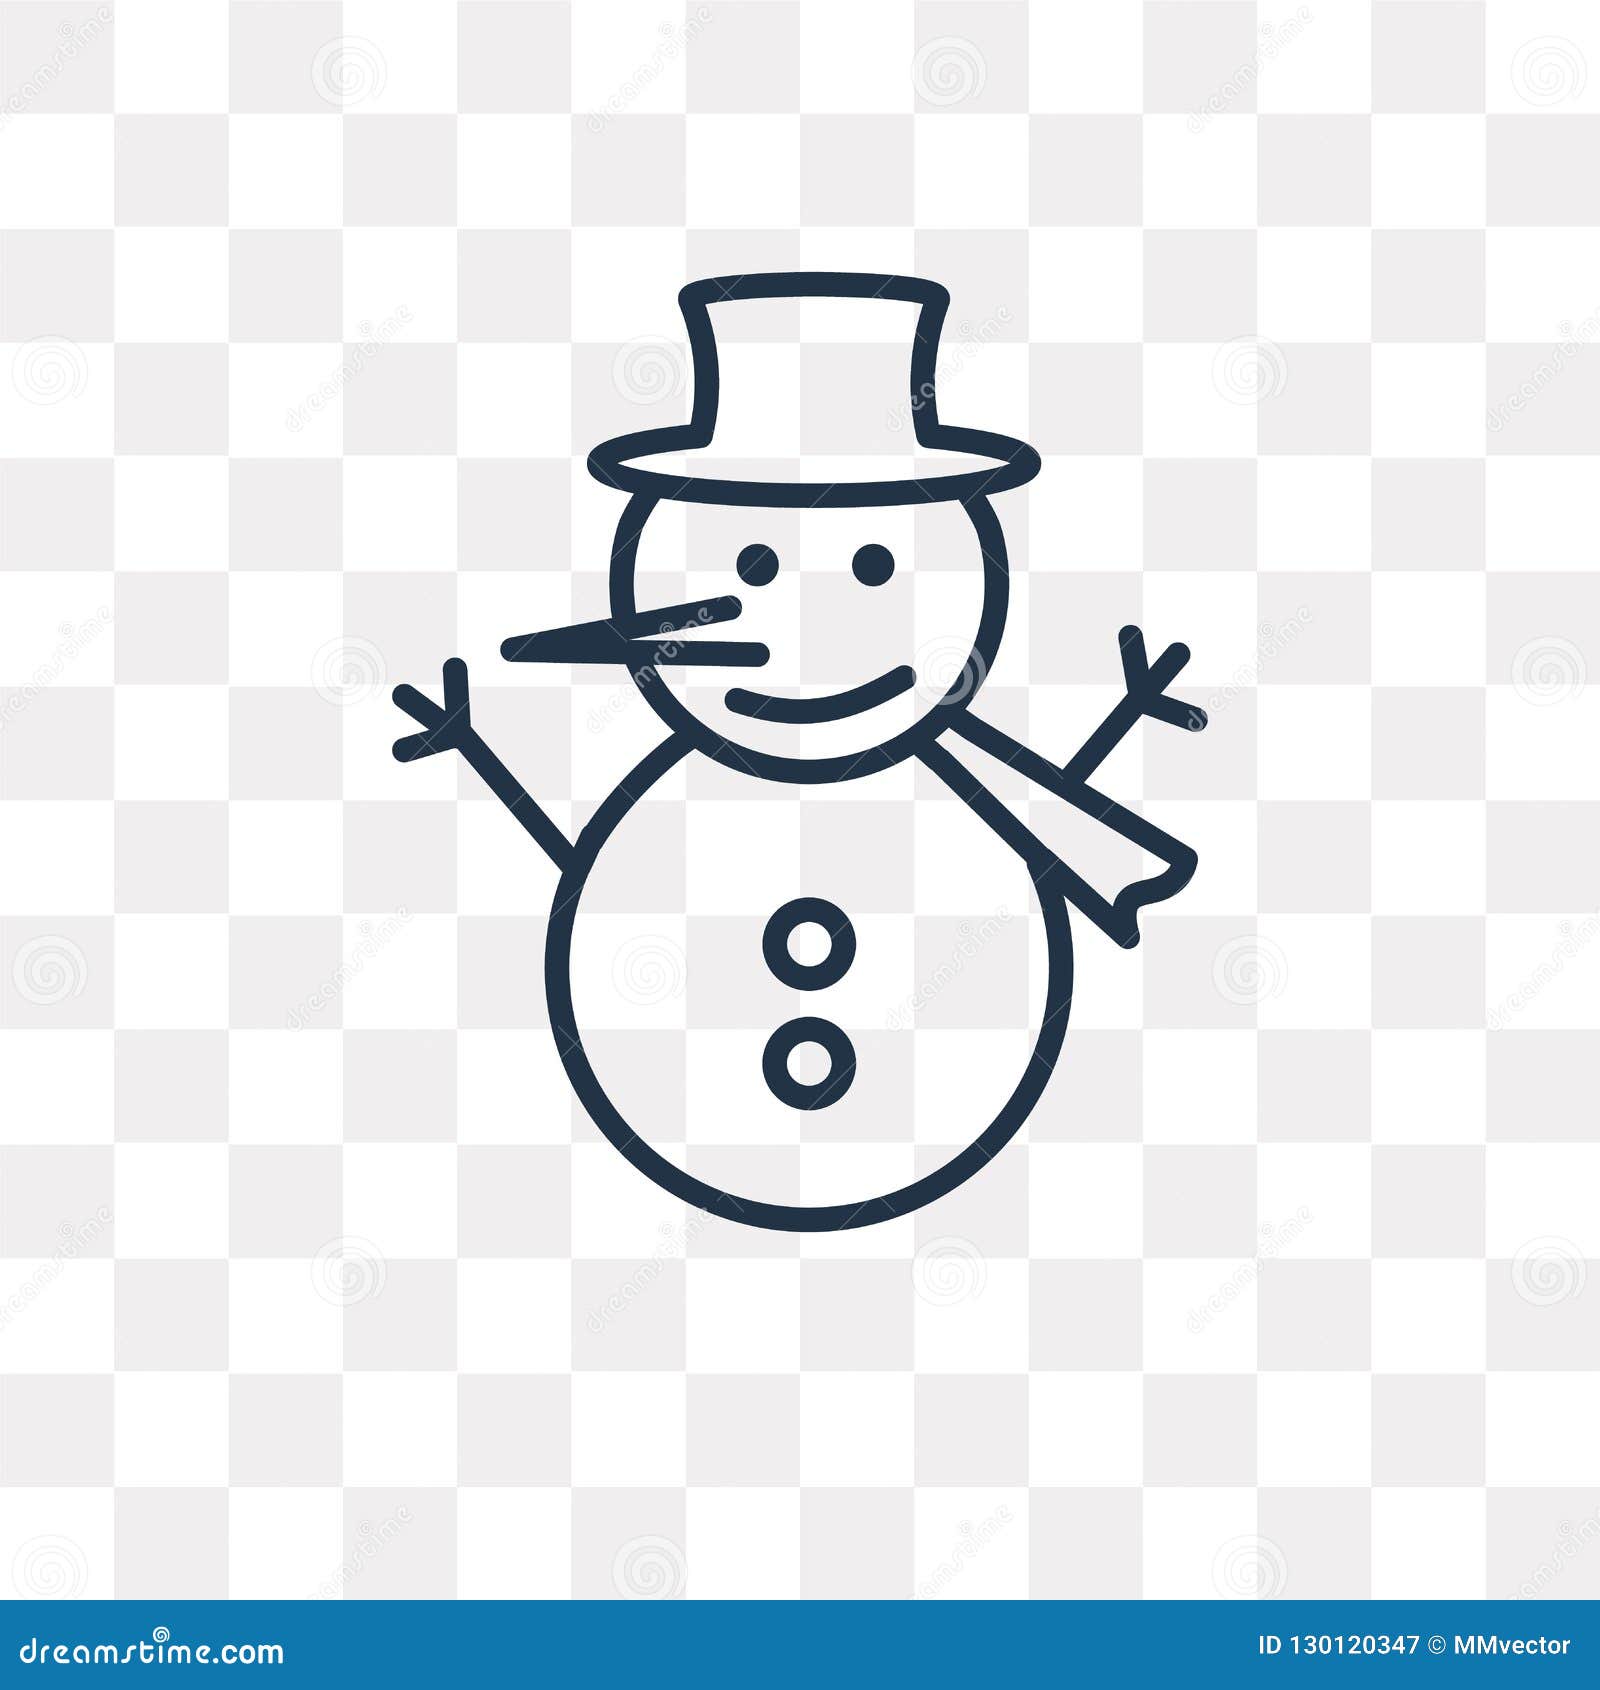 Snowman Vector Icon Isolated on Transparent Background, Linear S Stock ...